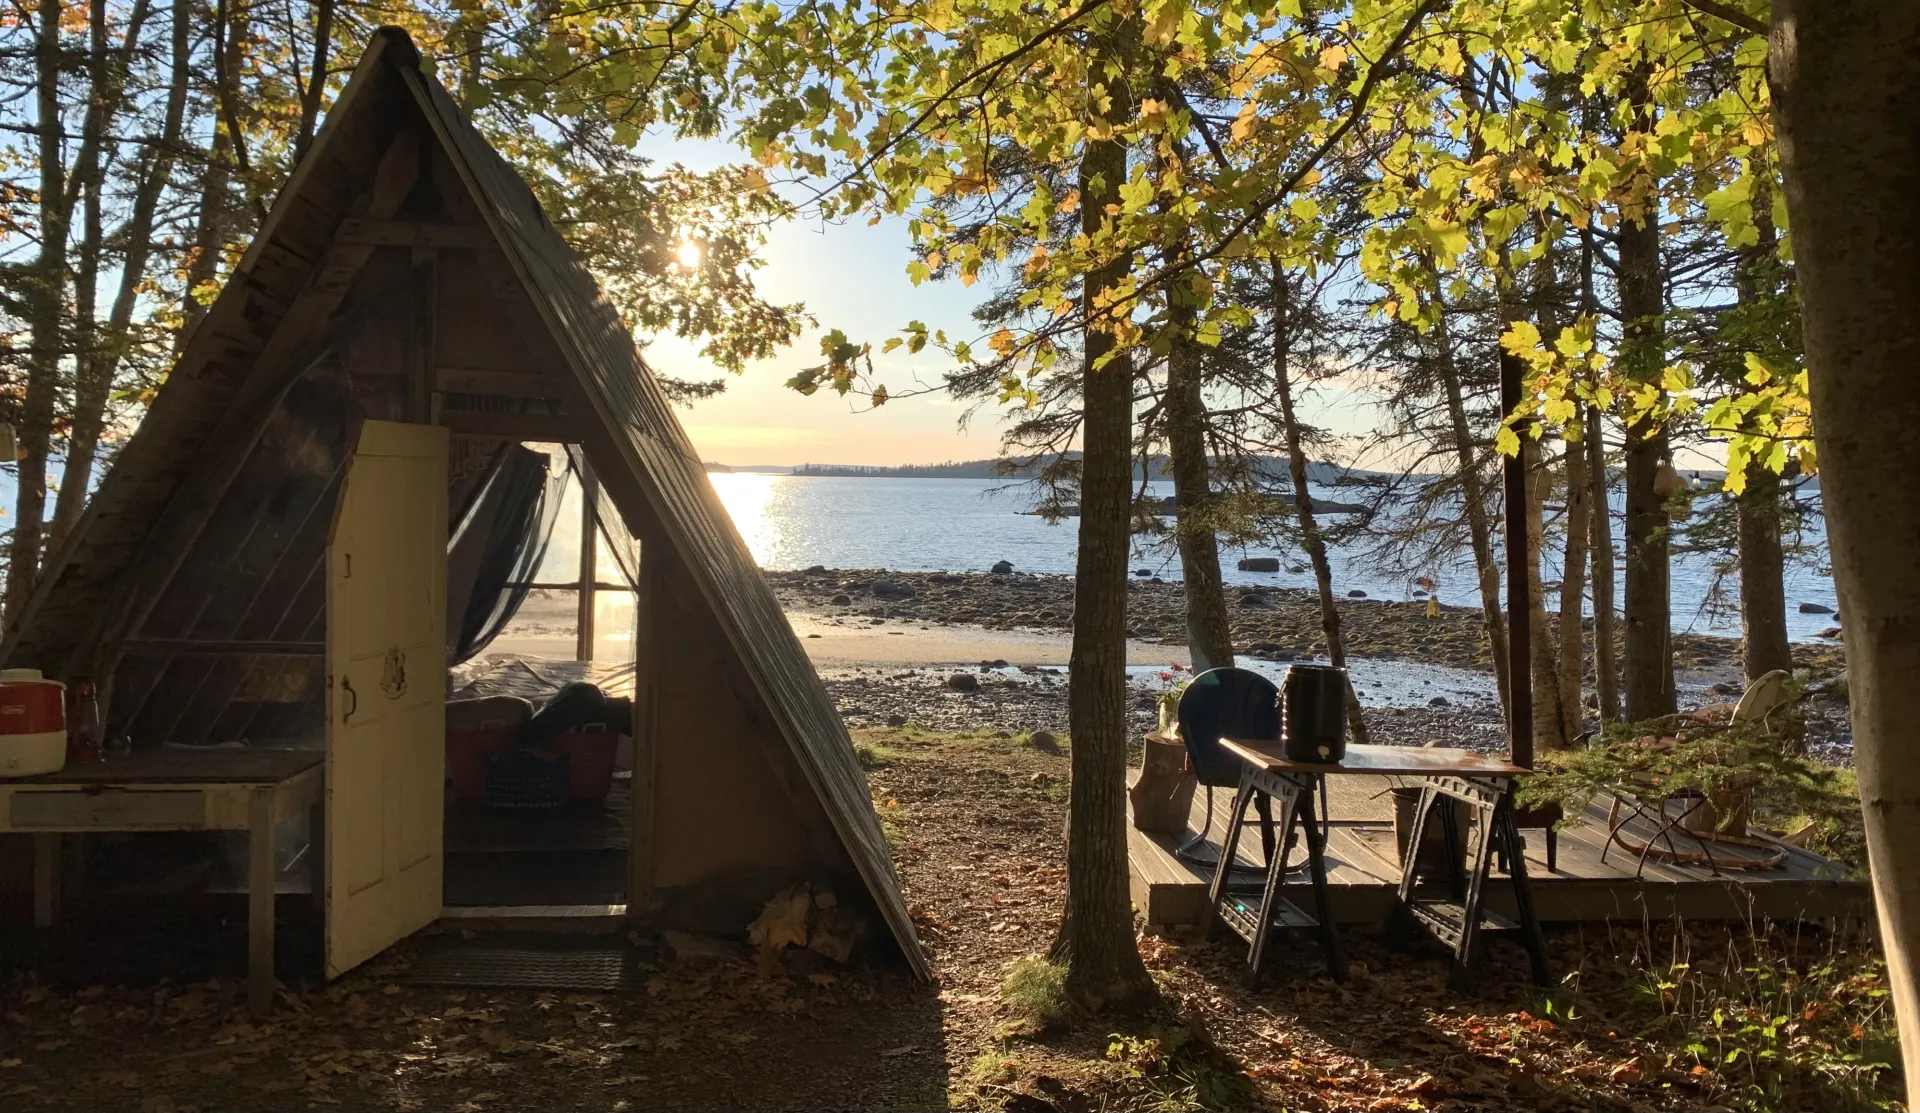 An off-grid glamping cabin on the coast of Maine. Photo credit: Hipcamp